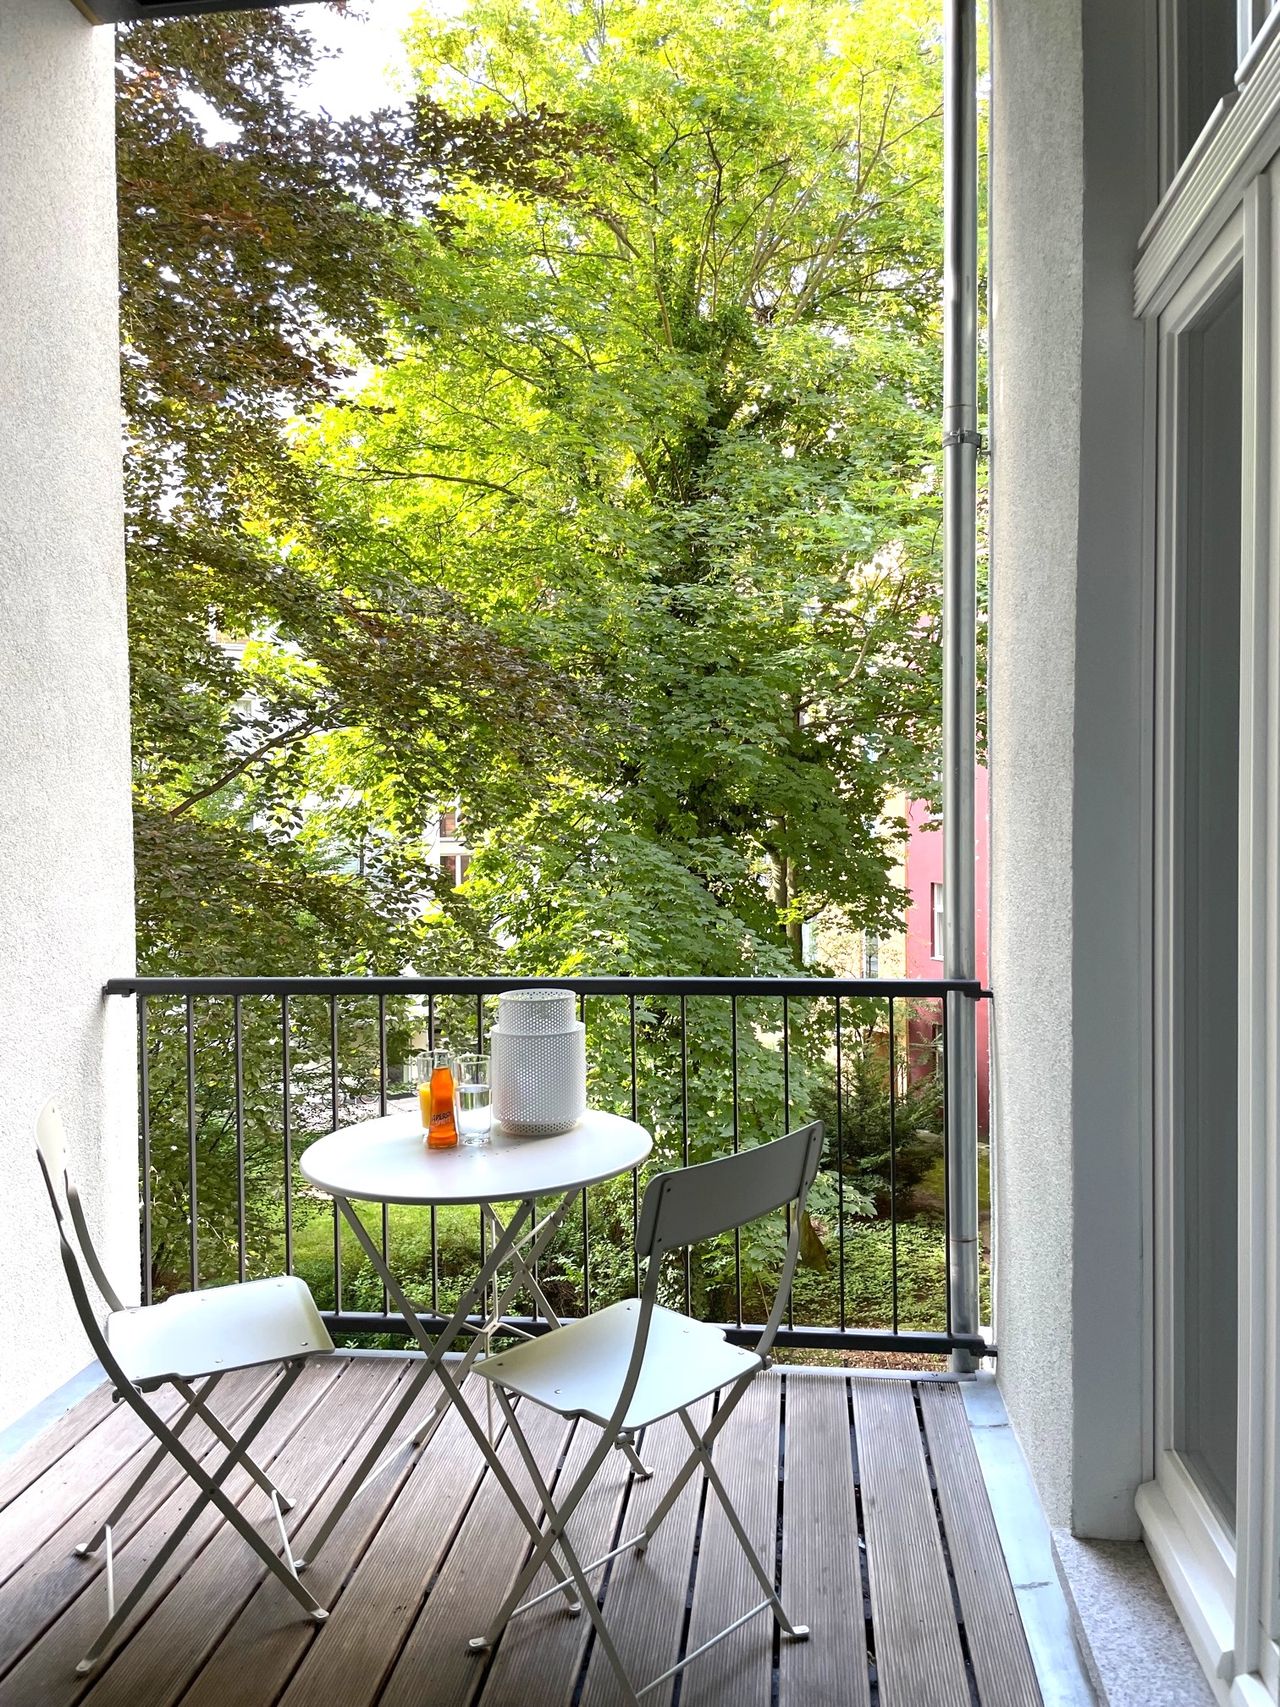 Fashionable, amazing bright, quiet and beautiful 2-room apartment in Tiergarten! 1000mb Wlan!